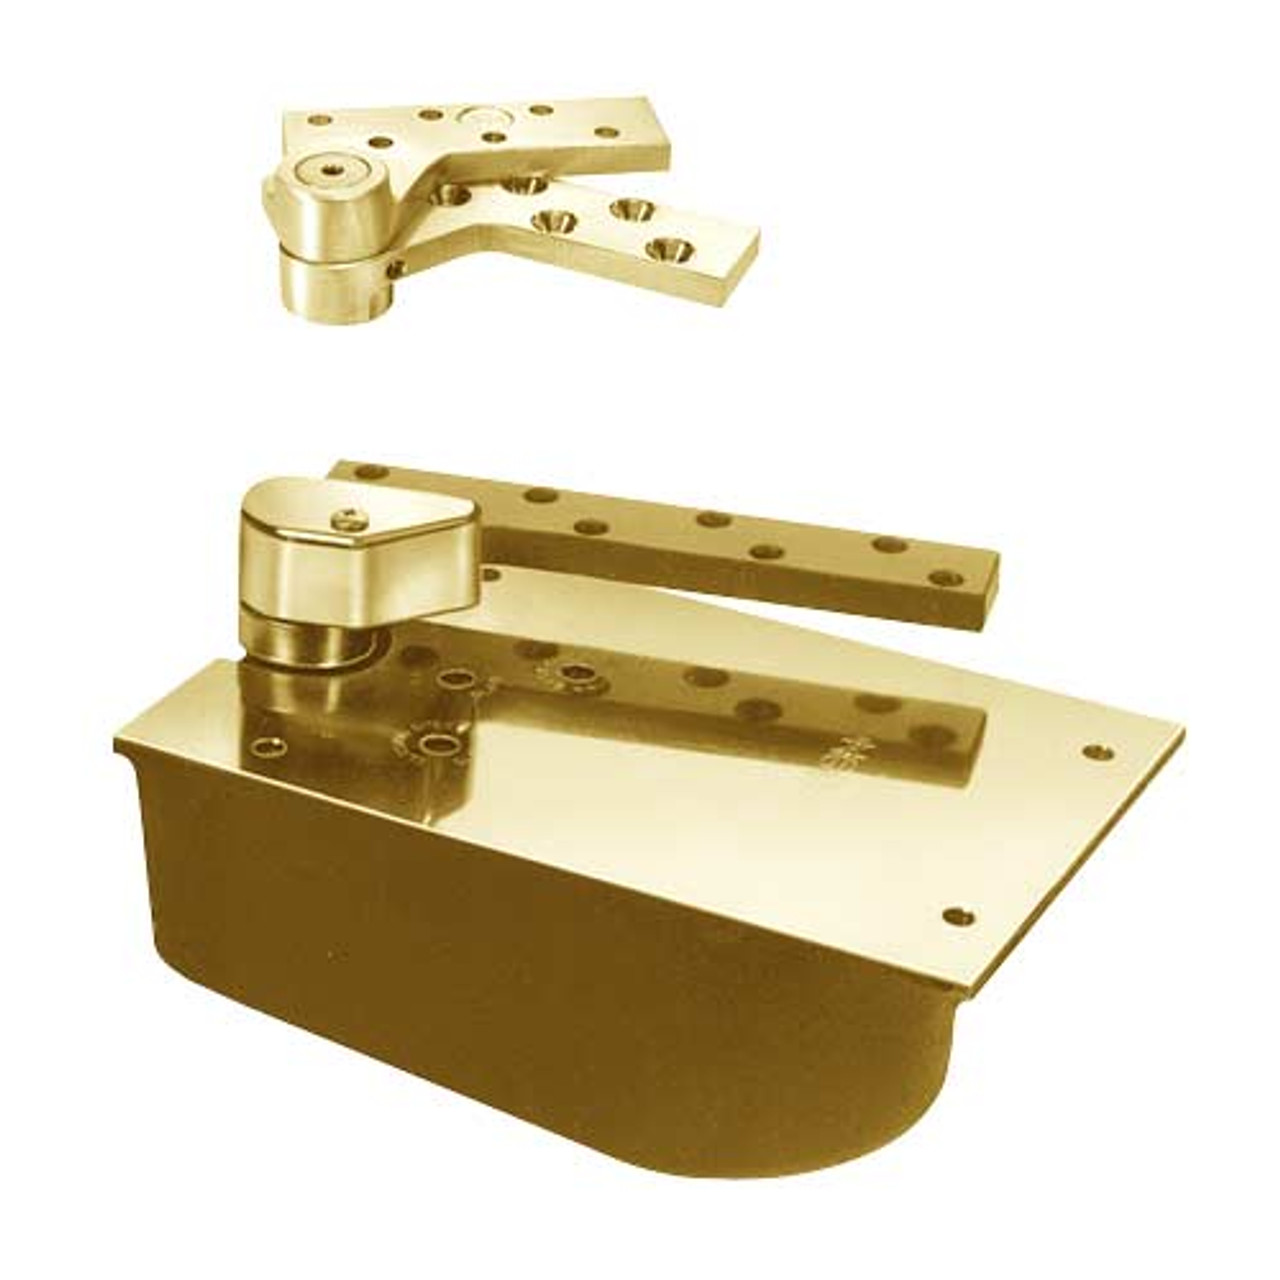 PHL27-105S-RH-605 Rixson 27 Series Extra Heavy Duty Lead Lined Offset Floor Closer in Bright Brass Finish